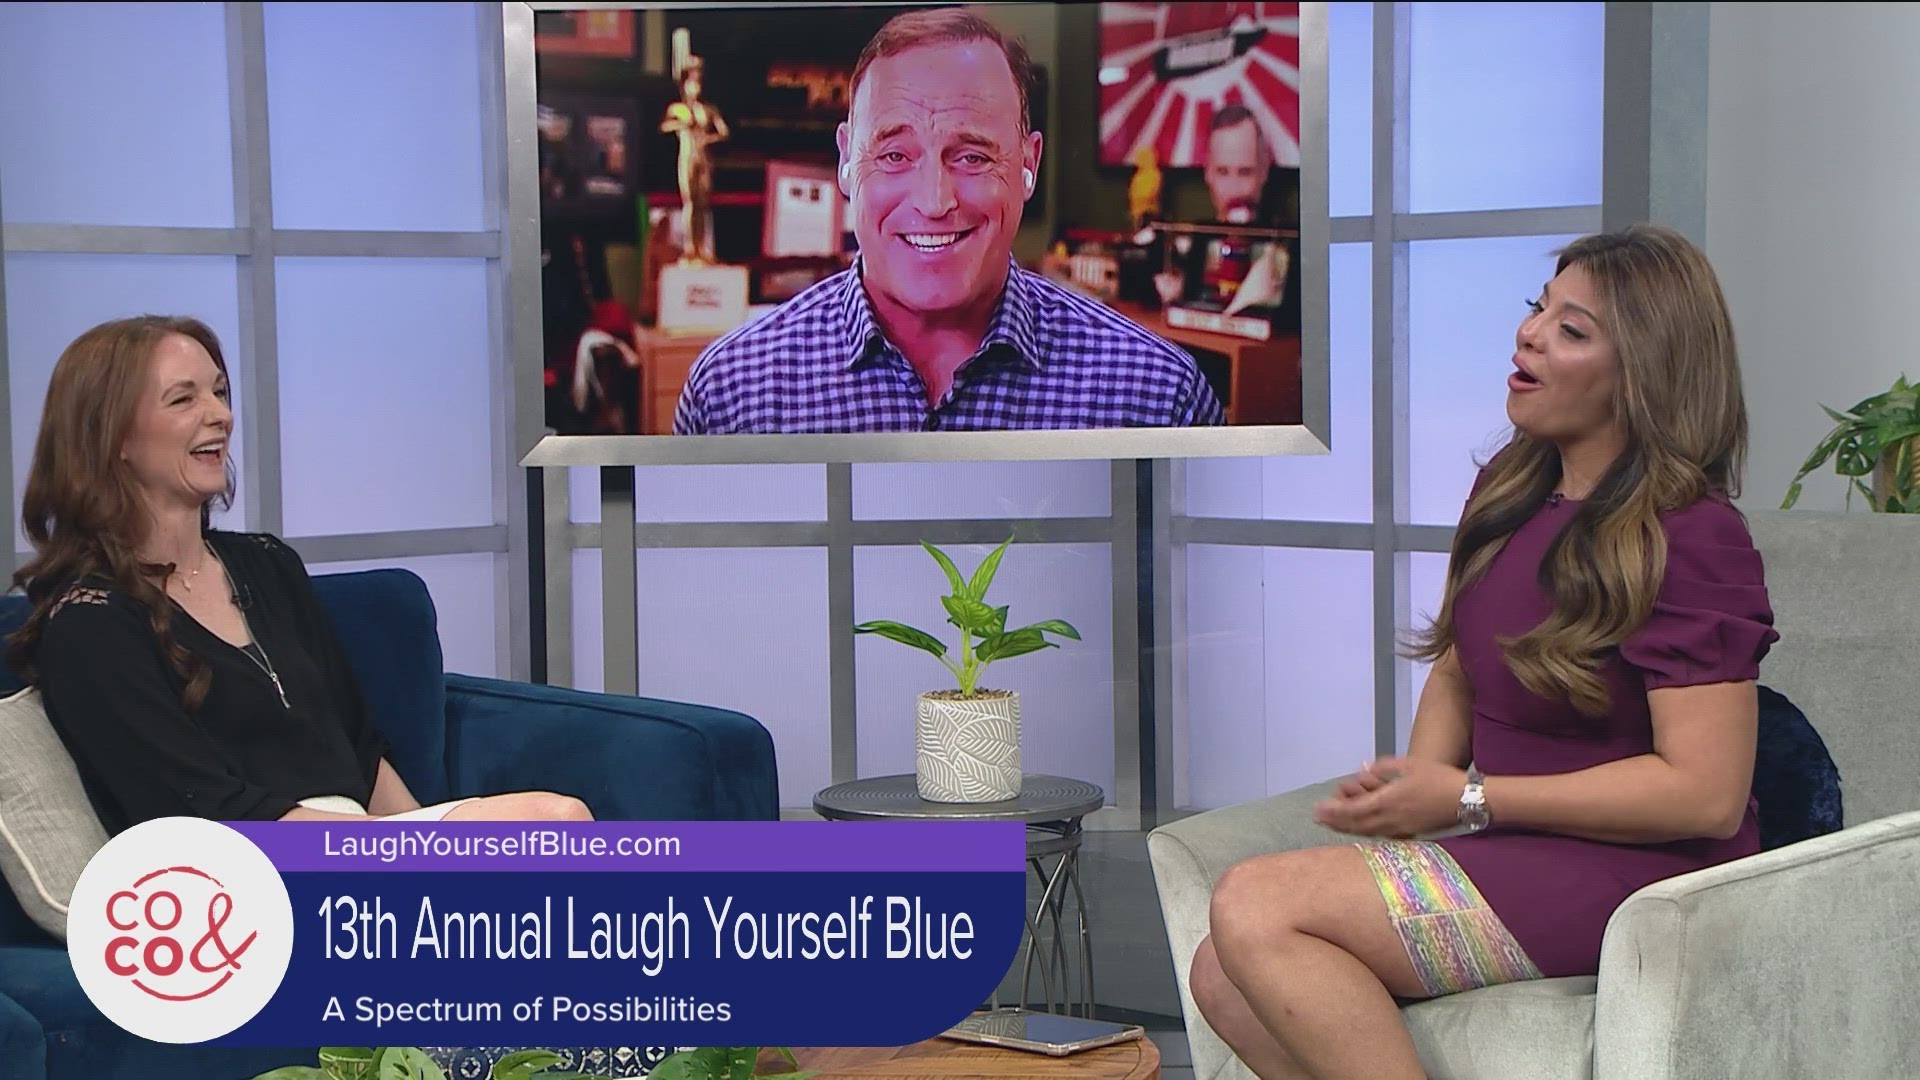 Get your tickets for the 13th Annual Laugh Yourself Blue fundraiser on April 25th! Learn more at LaughYourselfBlue.com.